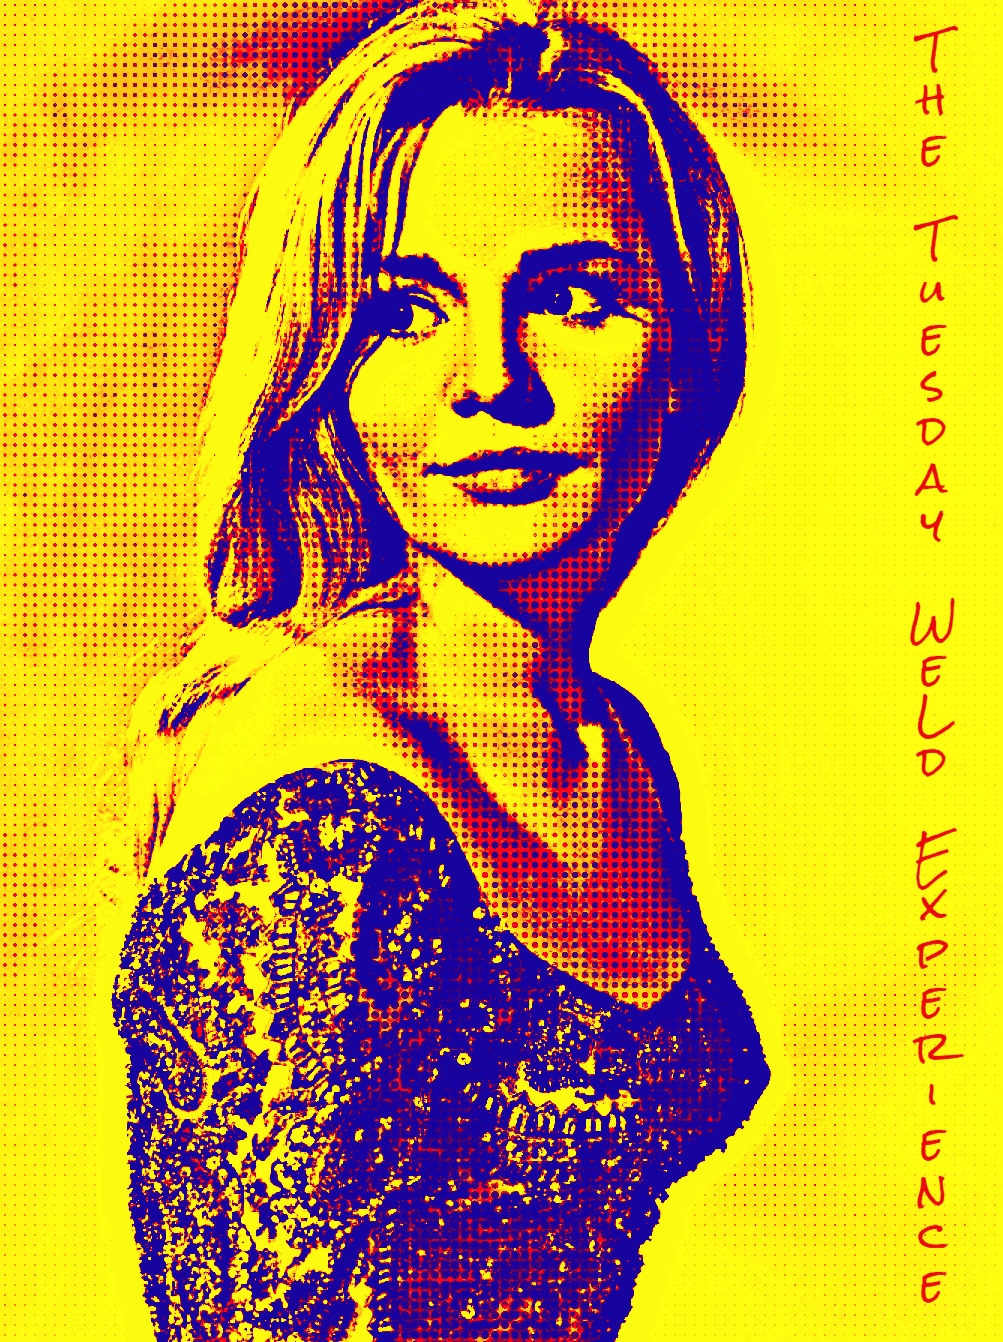 The Tuesday Weld Experience